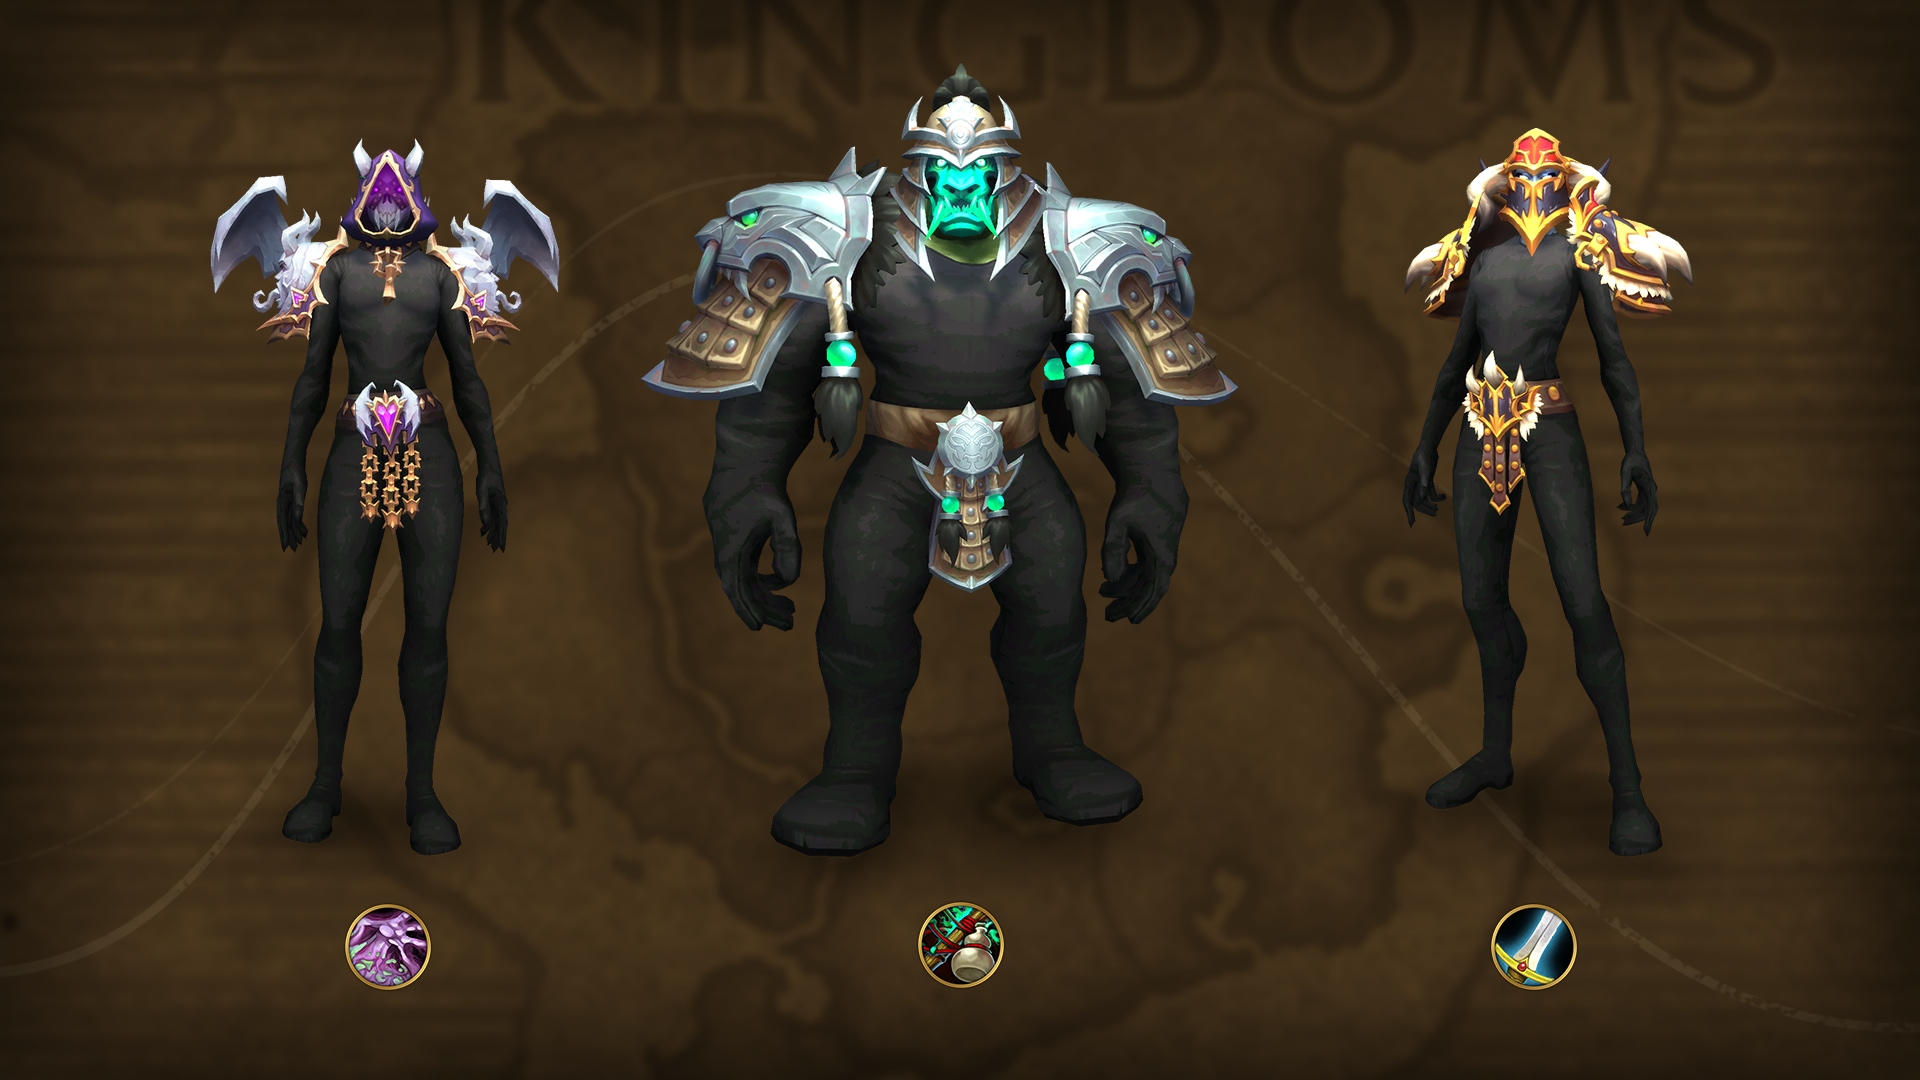 From left to right: Warlock, Monk, Warrior